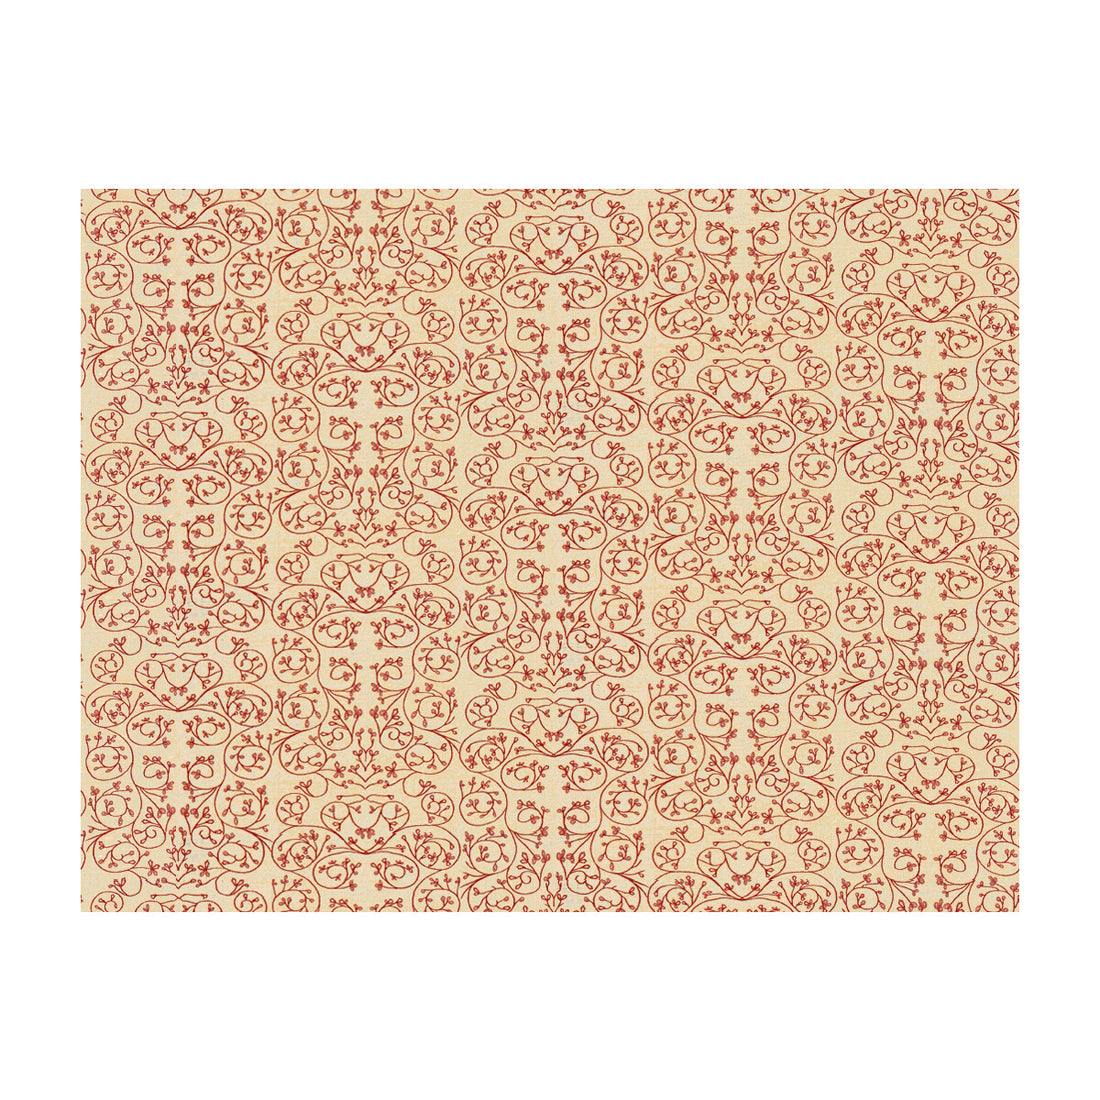 Garden fabric in cerise color - pattern GWF-3511.7.0 - by Lee Jofa Modern in the Allegra Hicks Garden collection